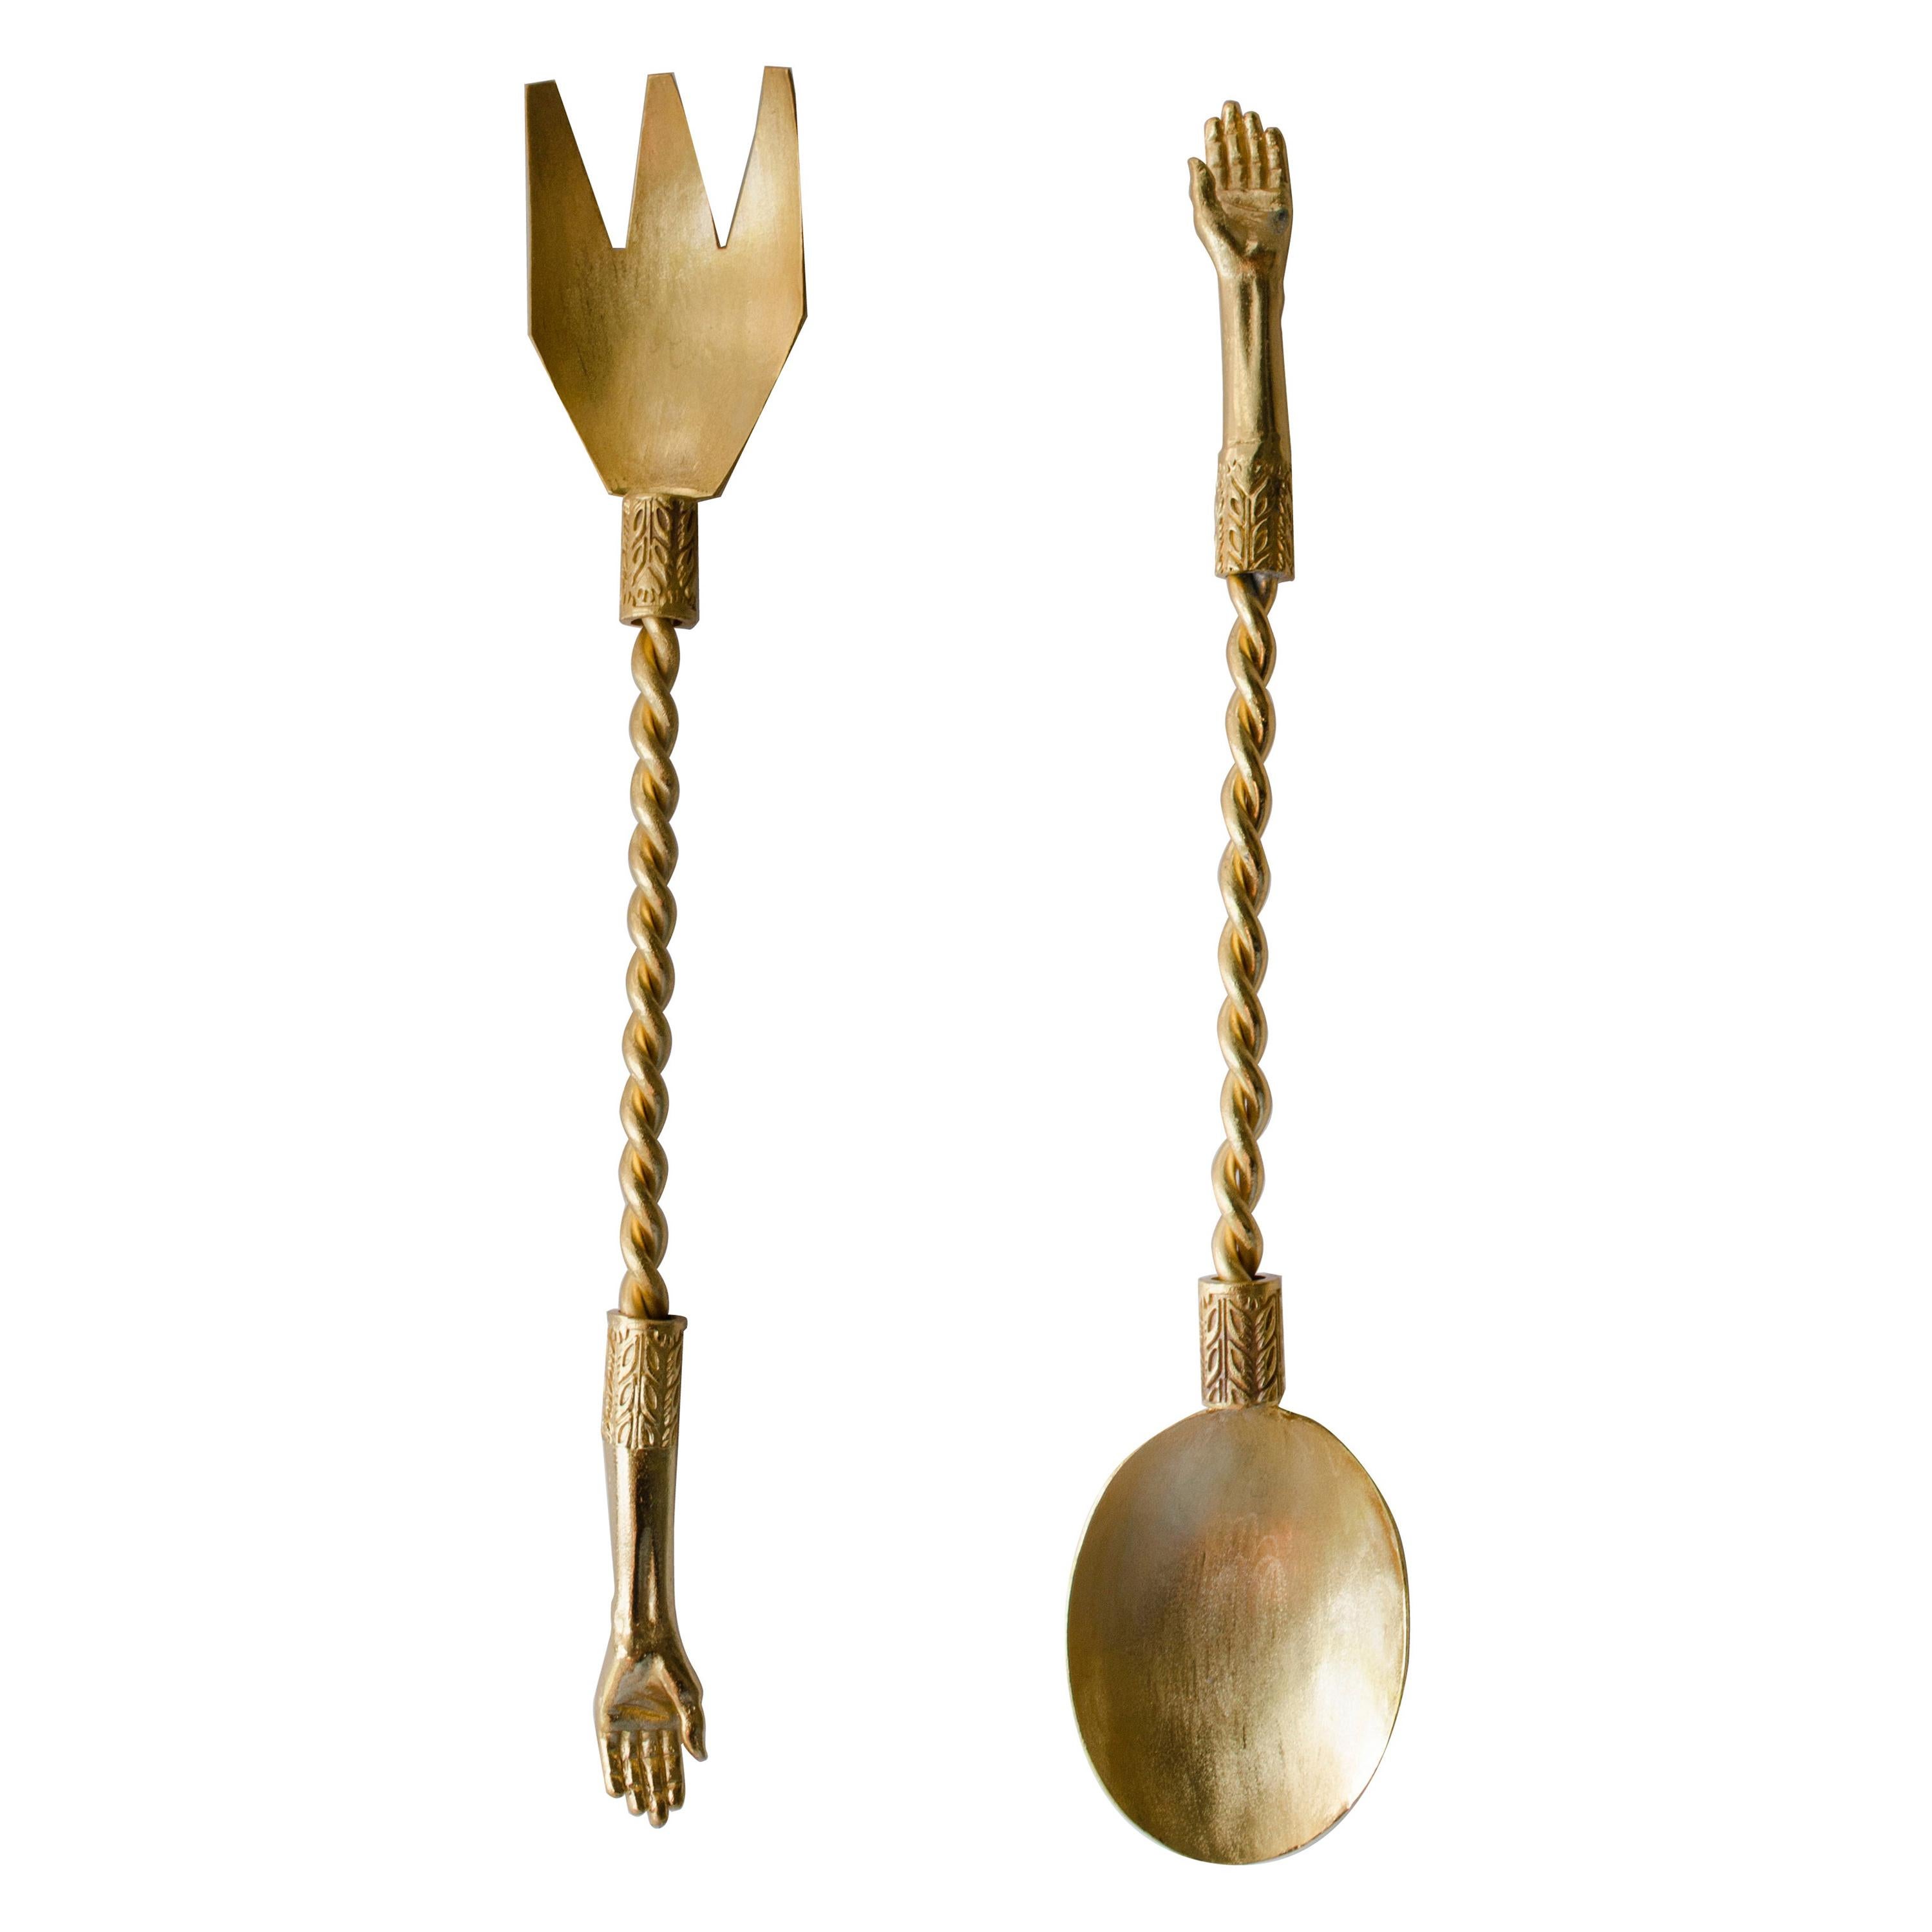 Contemporary Cutlery Servers Golden Plated Handcrafted Italy by Natalia Criado For Sale